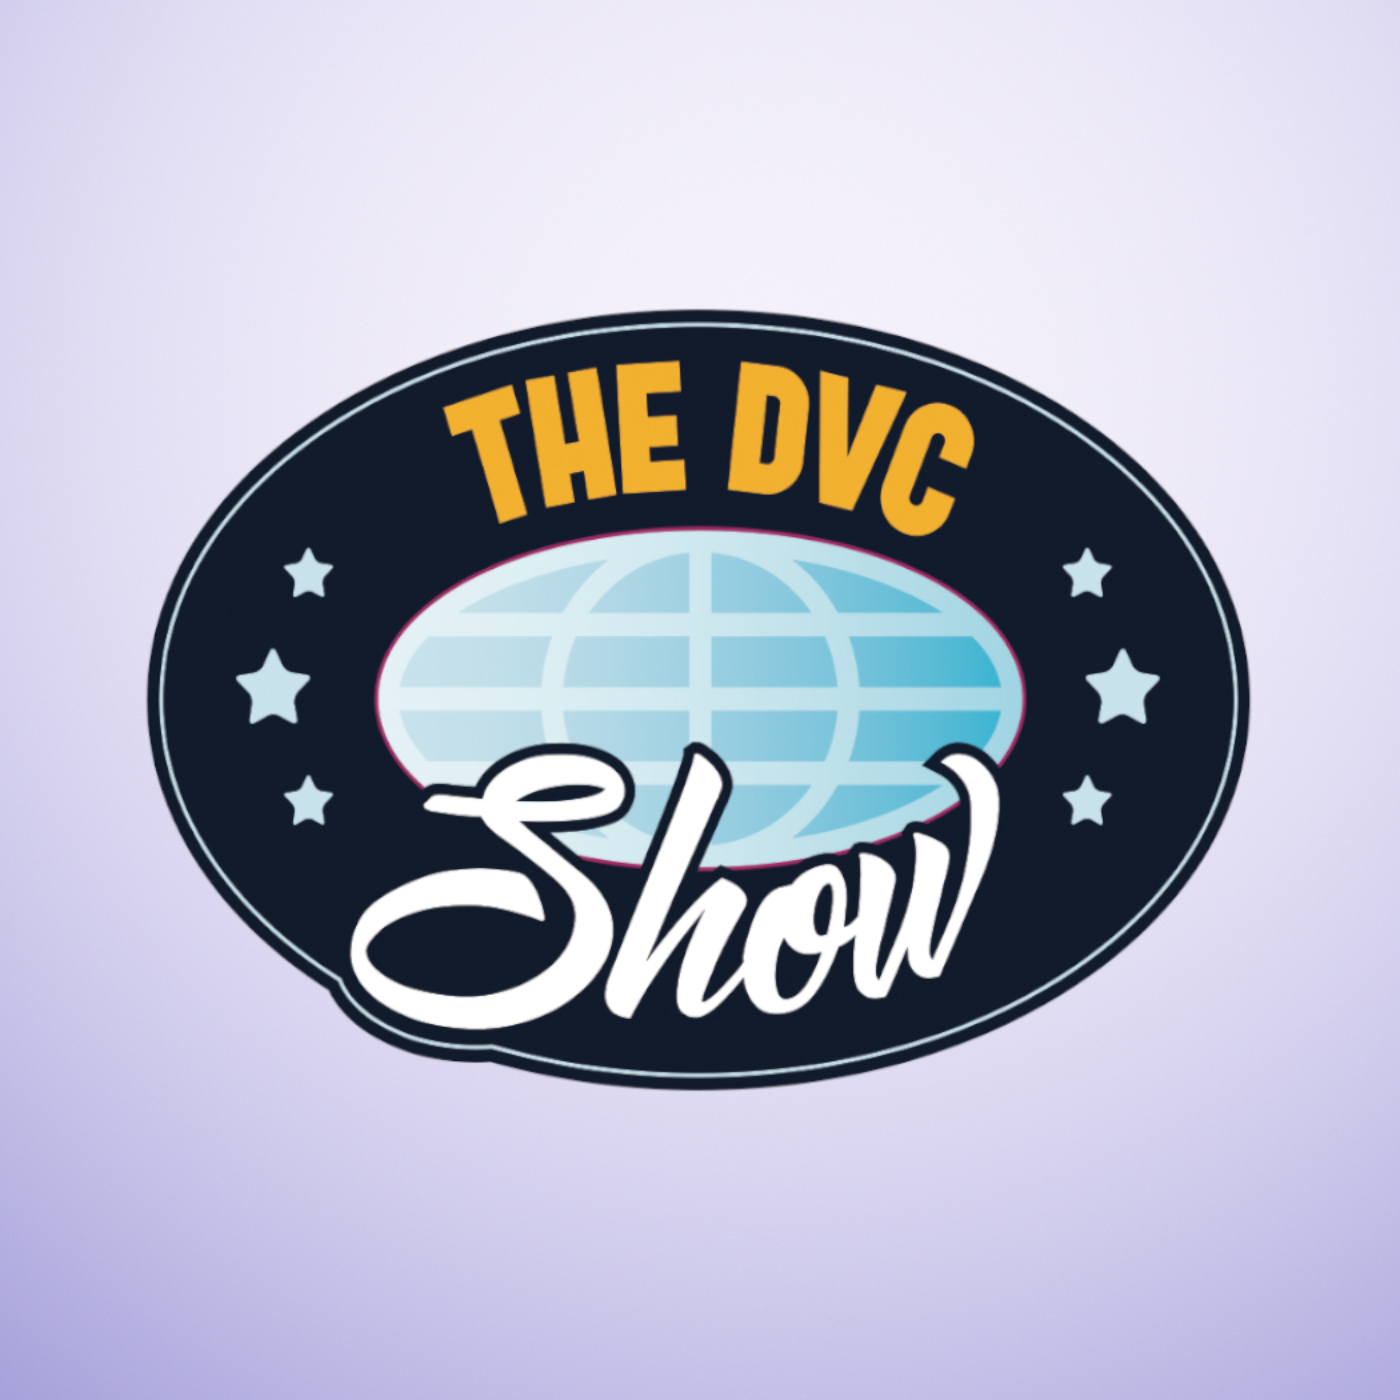 The DVC Show Podcast – 01/13/20